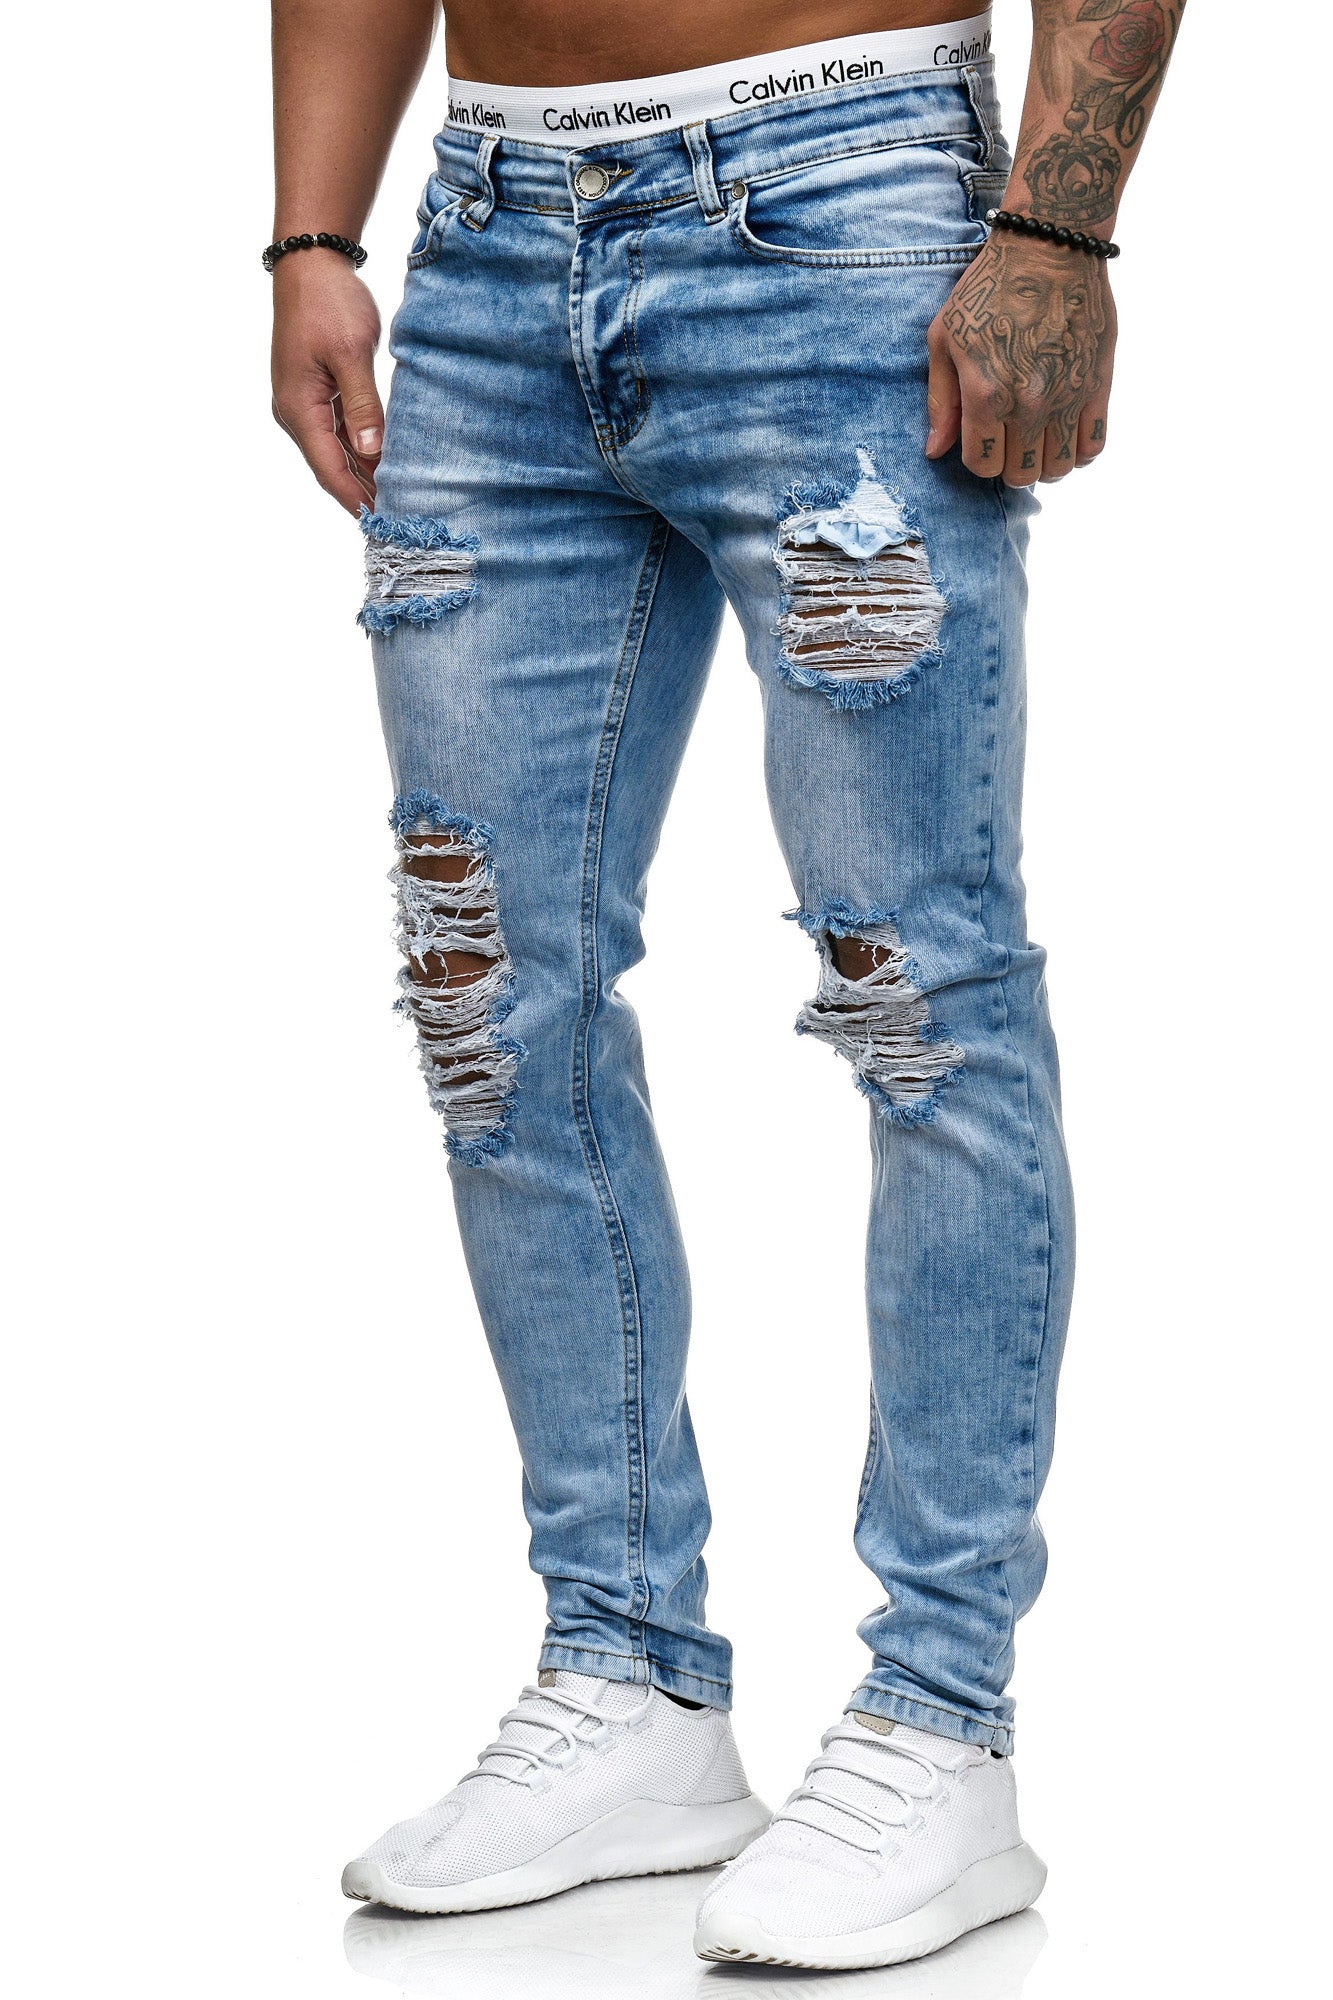 american eagle dark wash ripped jeans